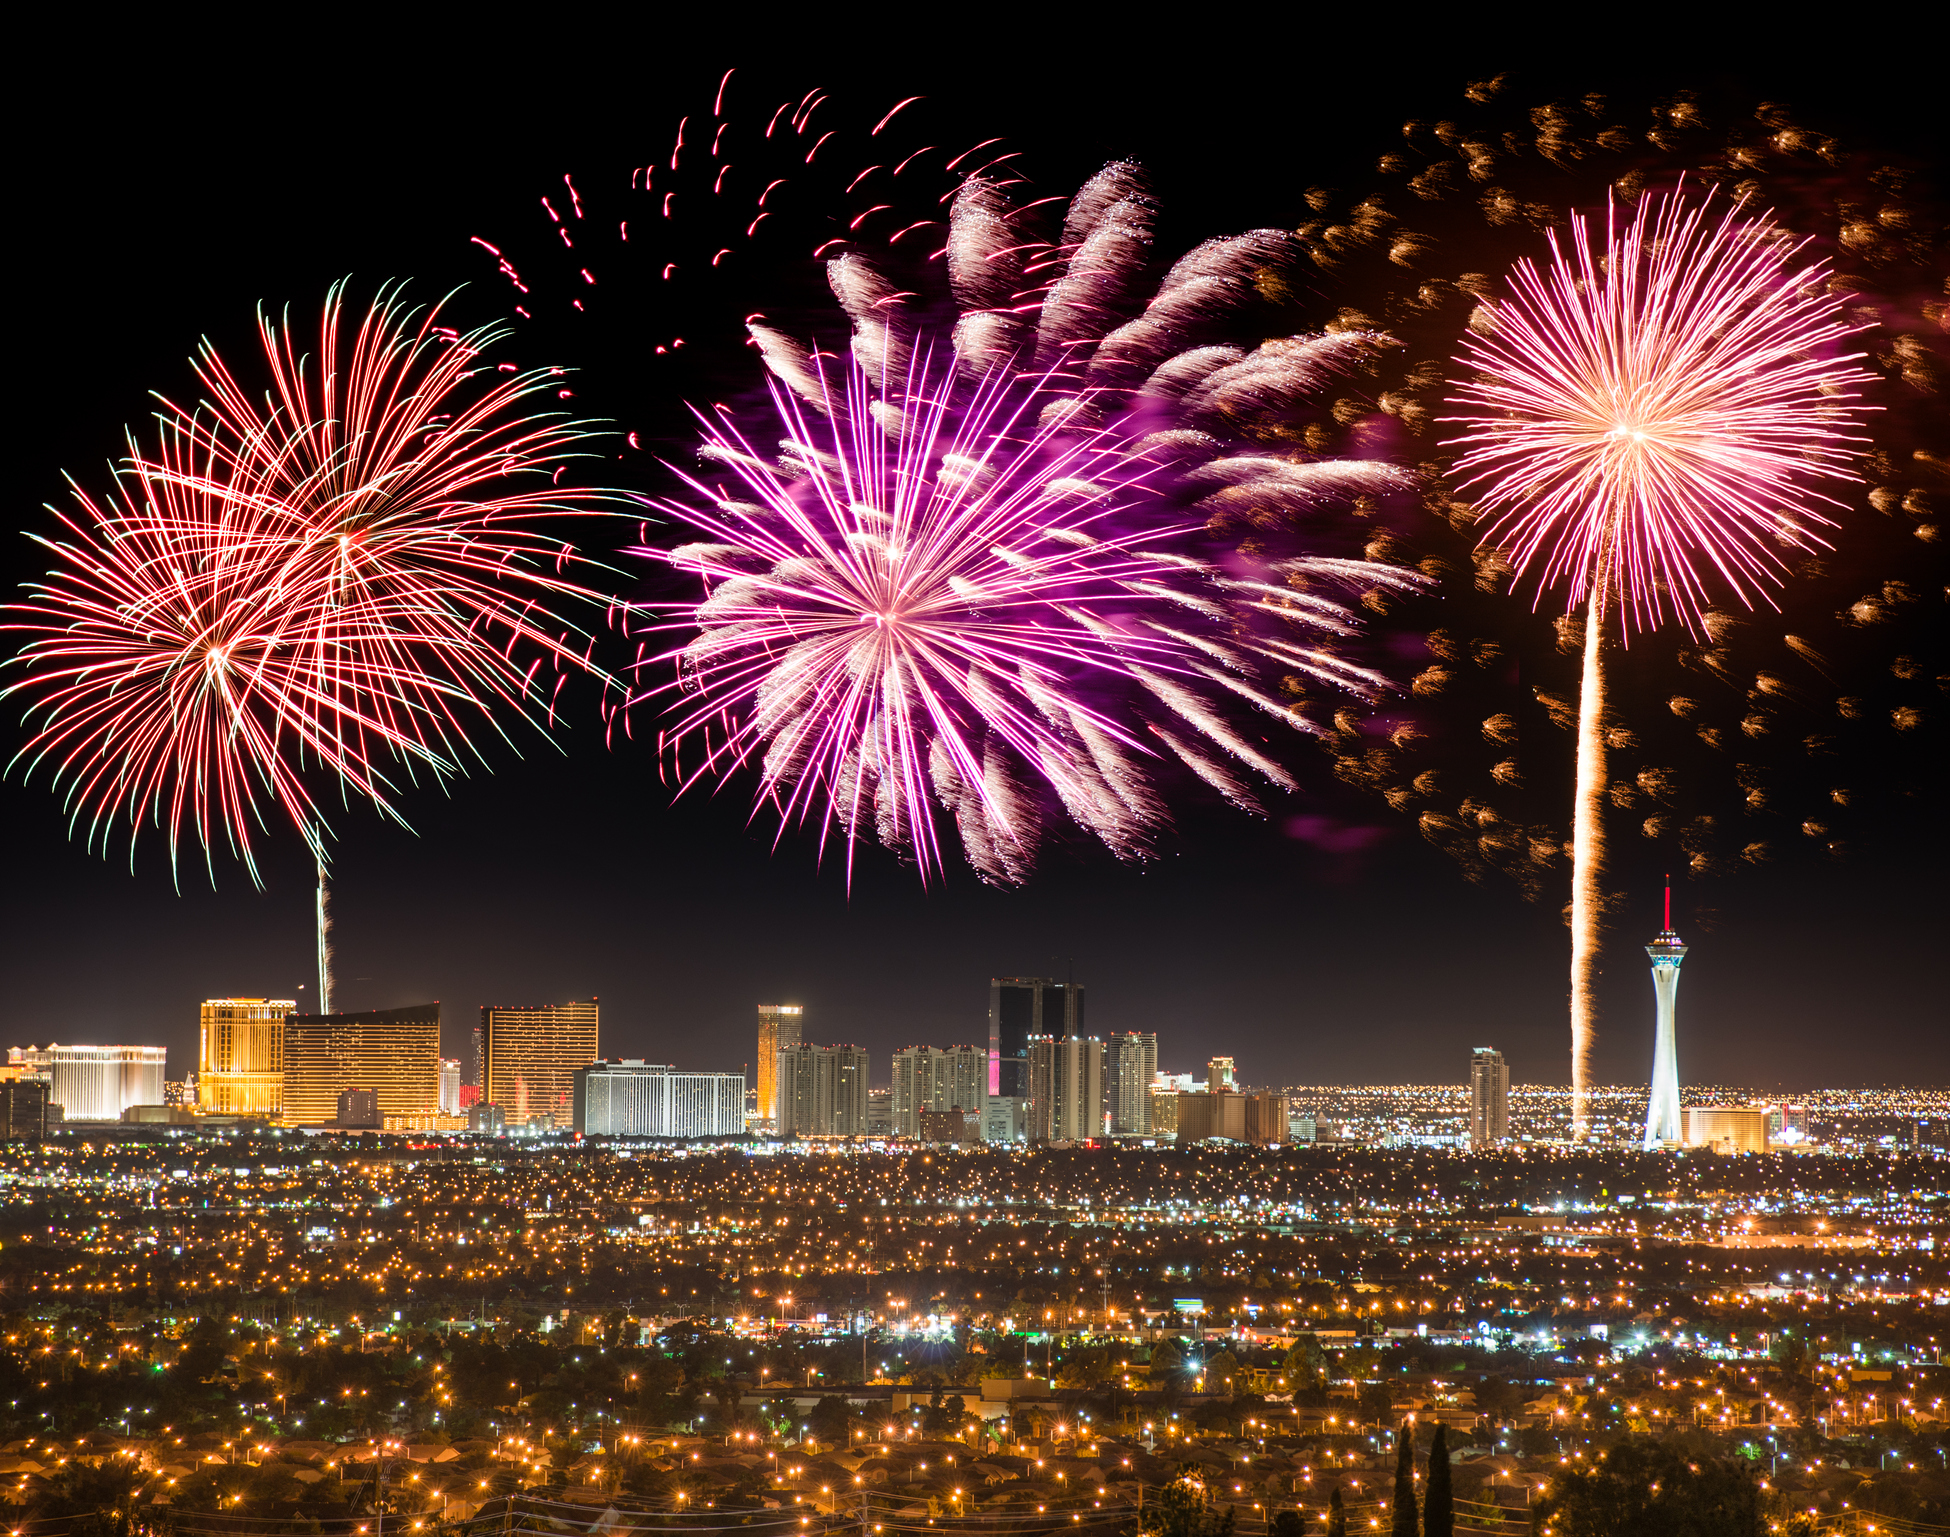 Fireworks in Las Vegas for New Year's Eve